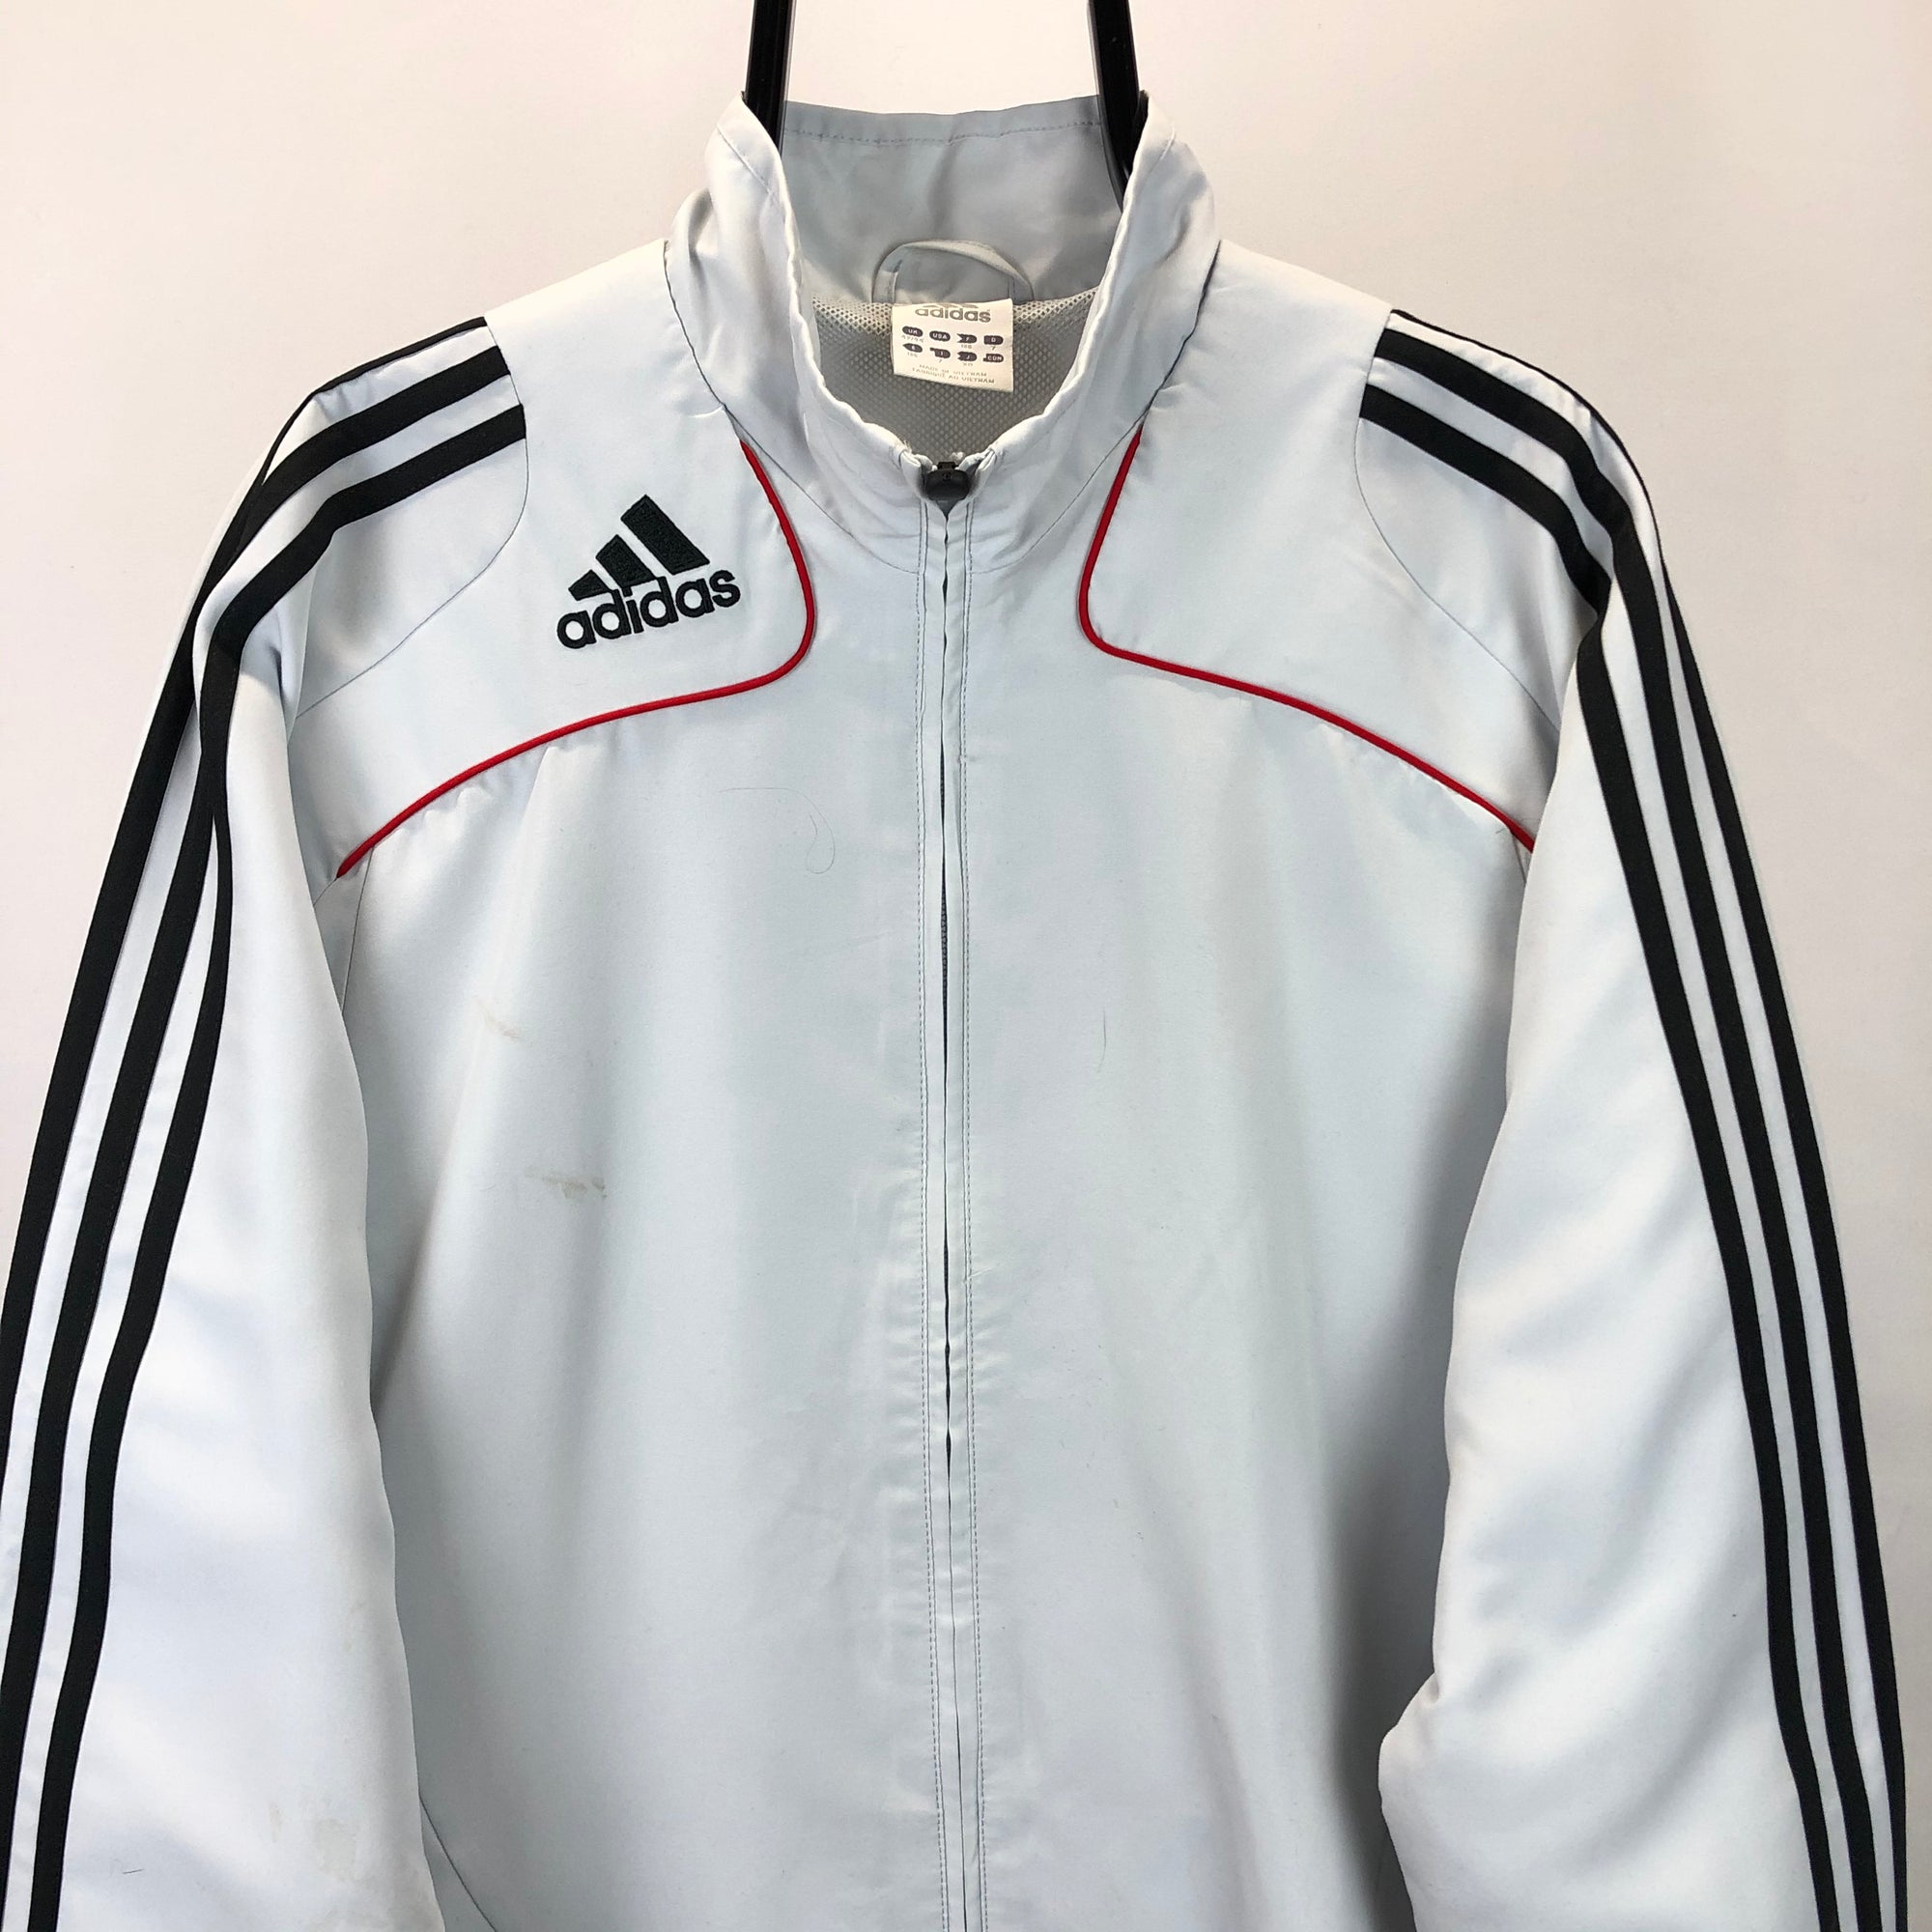 Adidas Track Jacket in Stone/Red/Black - Men's Large/Women's XL